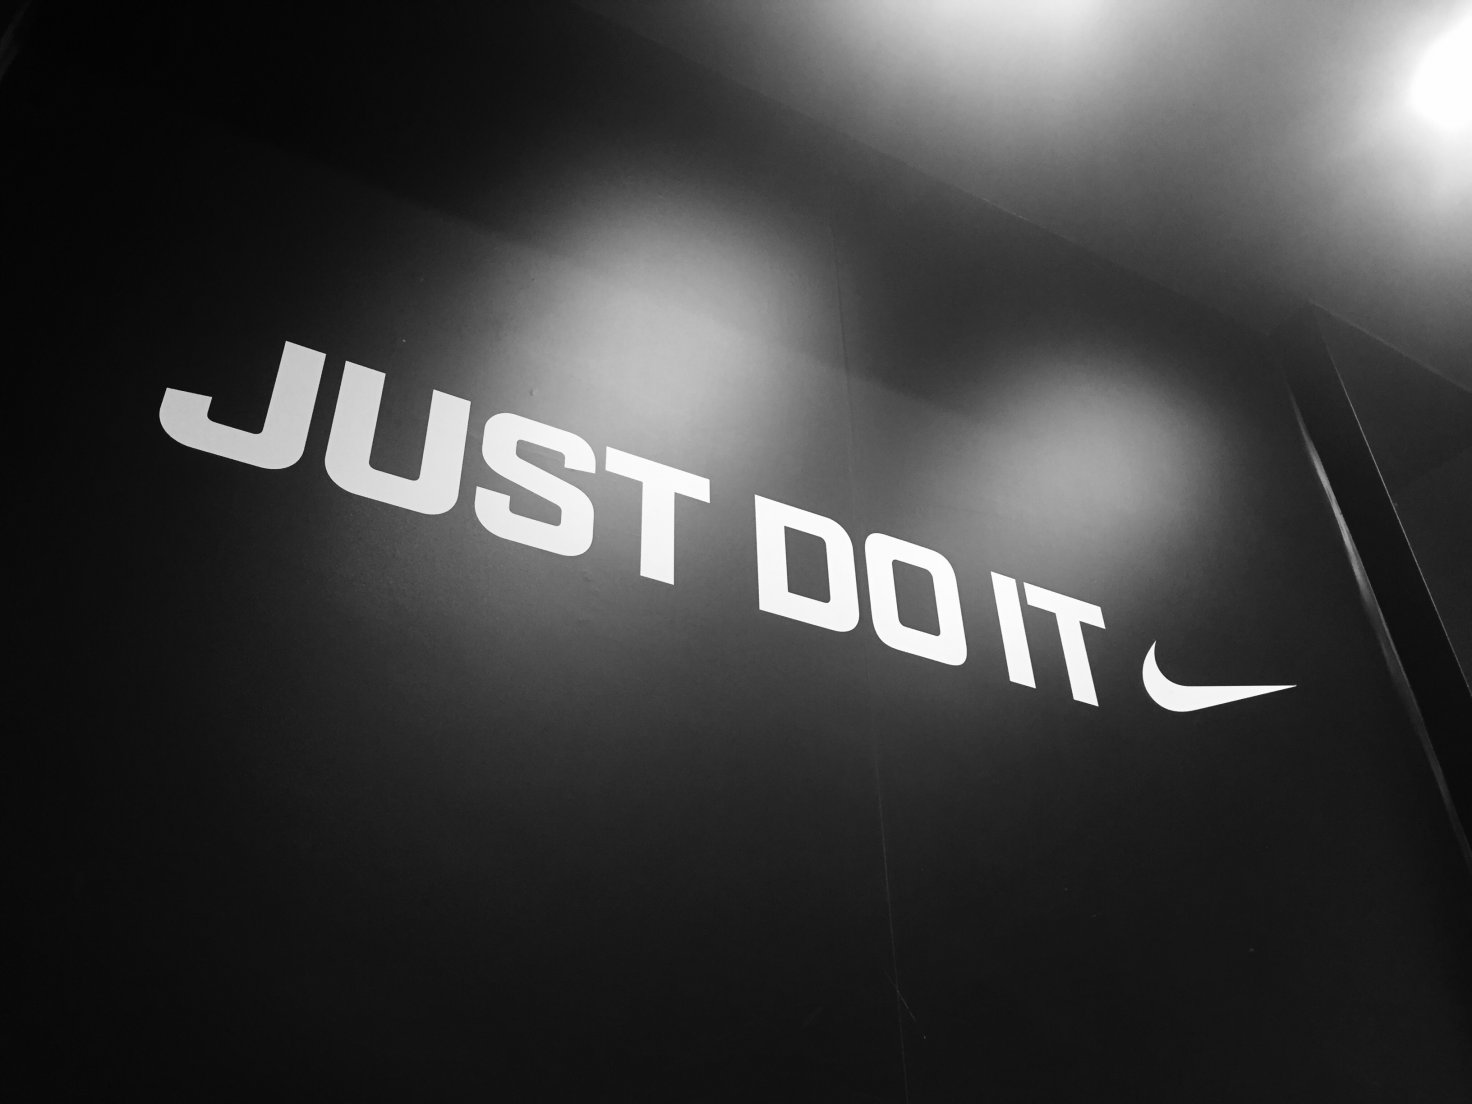 nike stock prices are on the rise